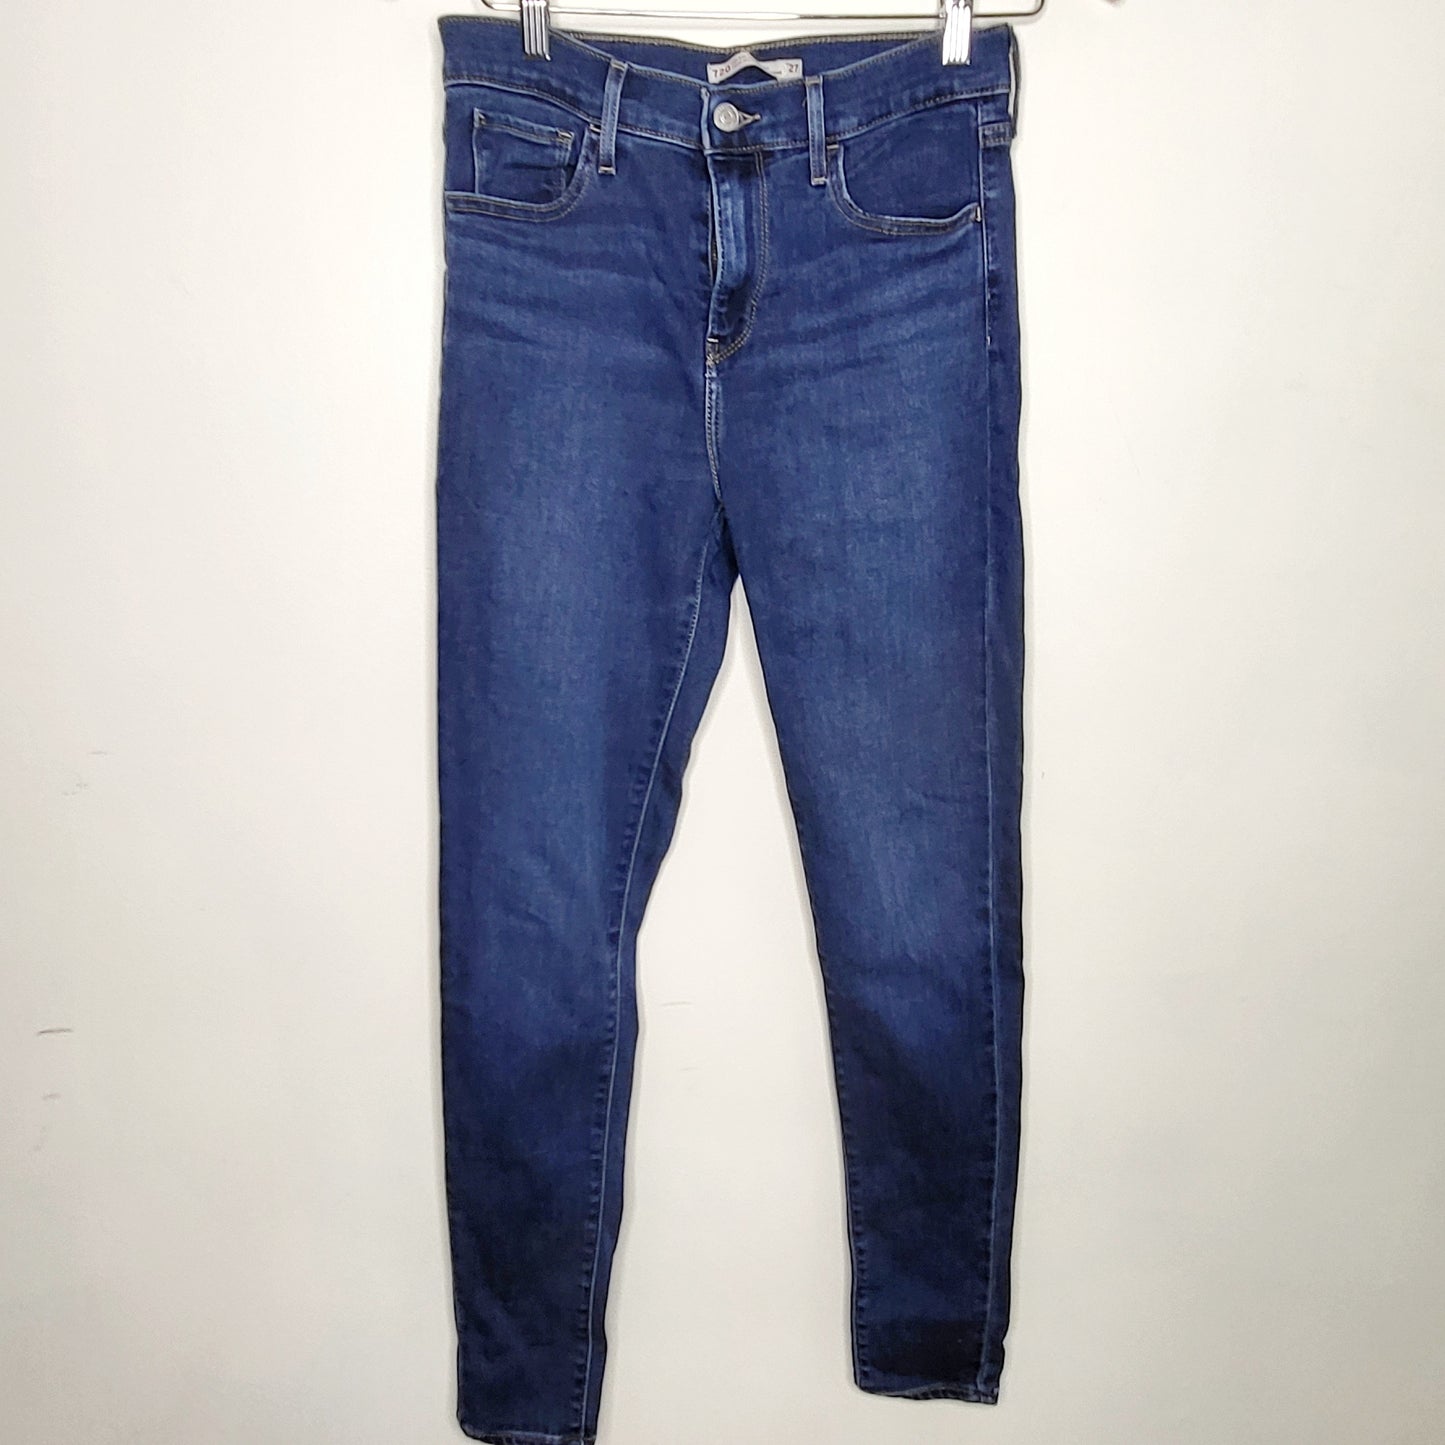 EMIN11 - Levi's 720 high rise super skinny jeans, size 27, good condition